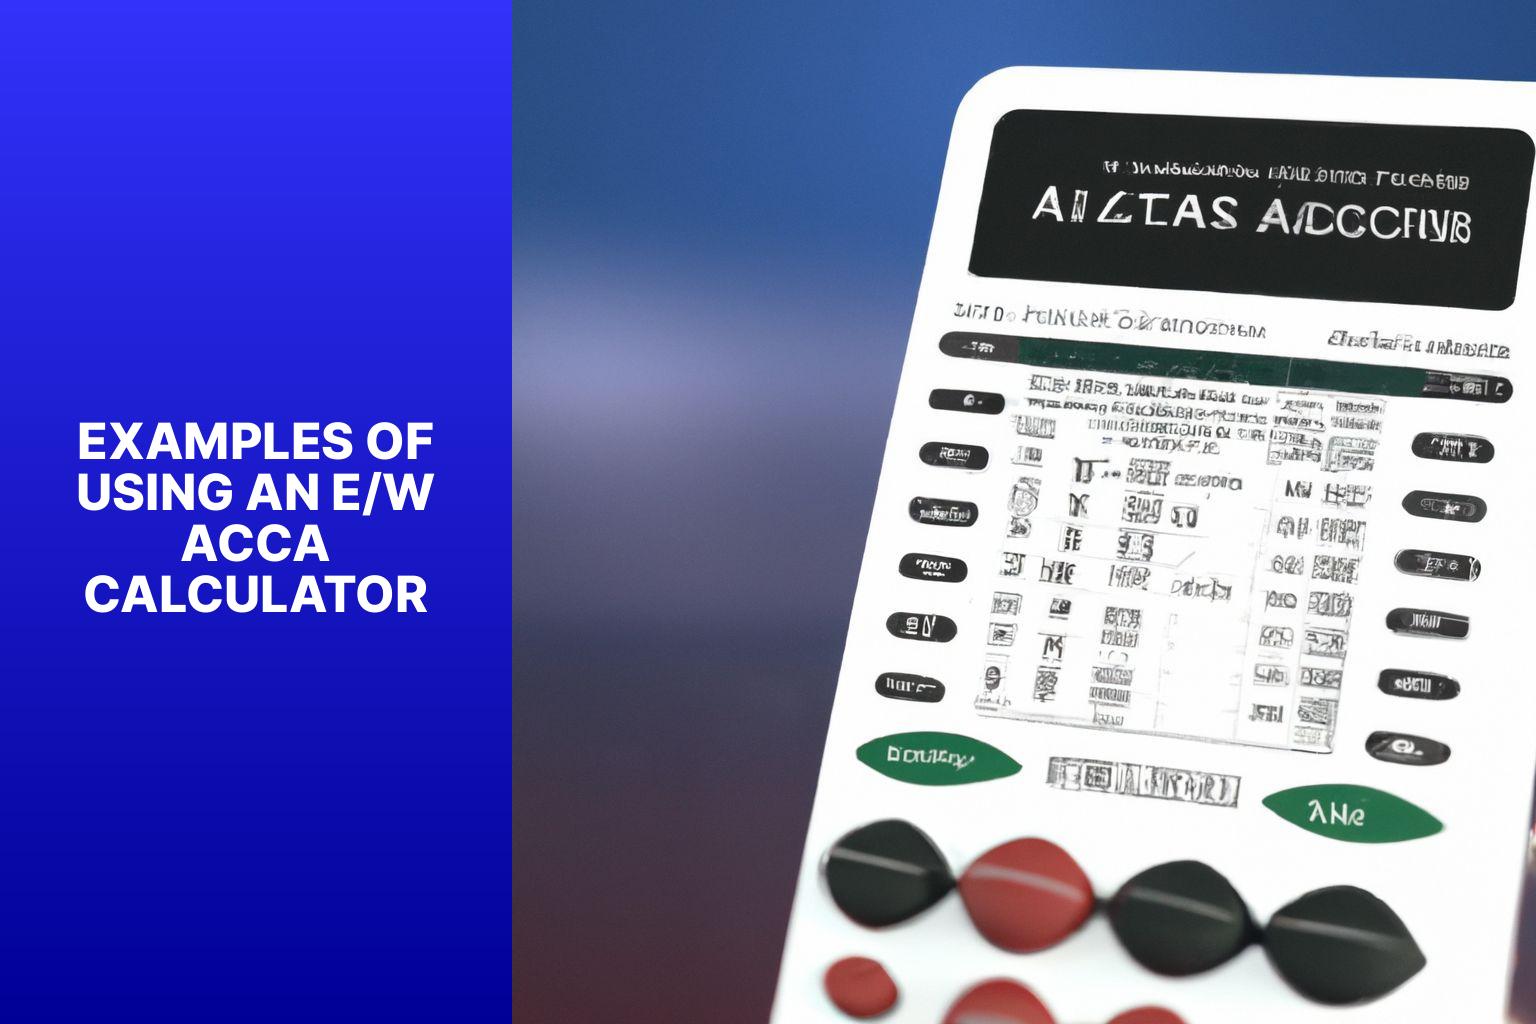 Examples of Using an E/W Acca Calculator - EW Acca Calculator: Calculating E/W Accumulator Bets 